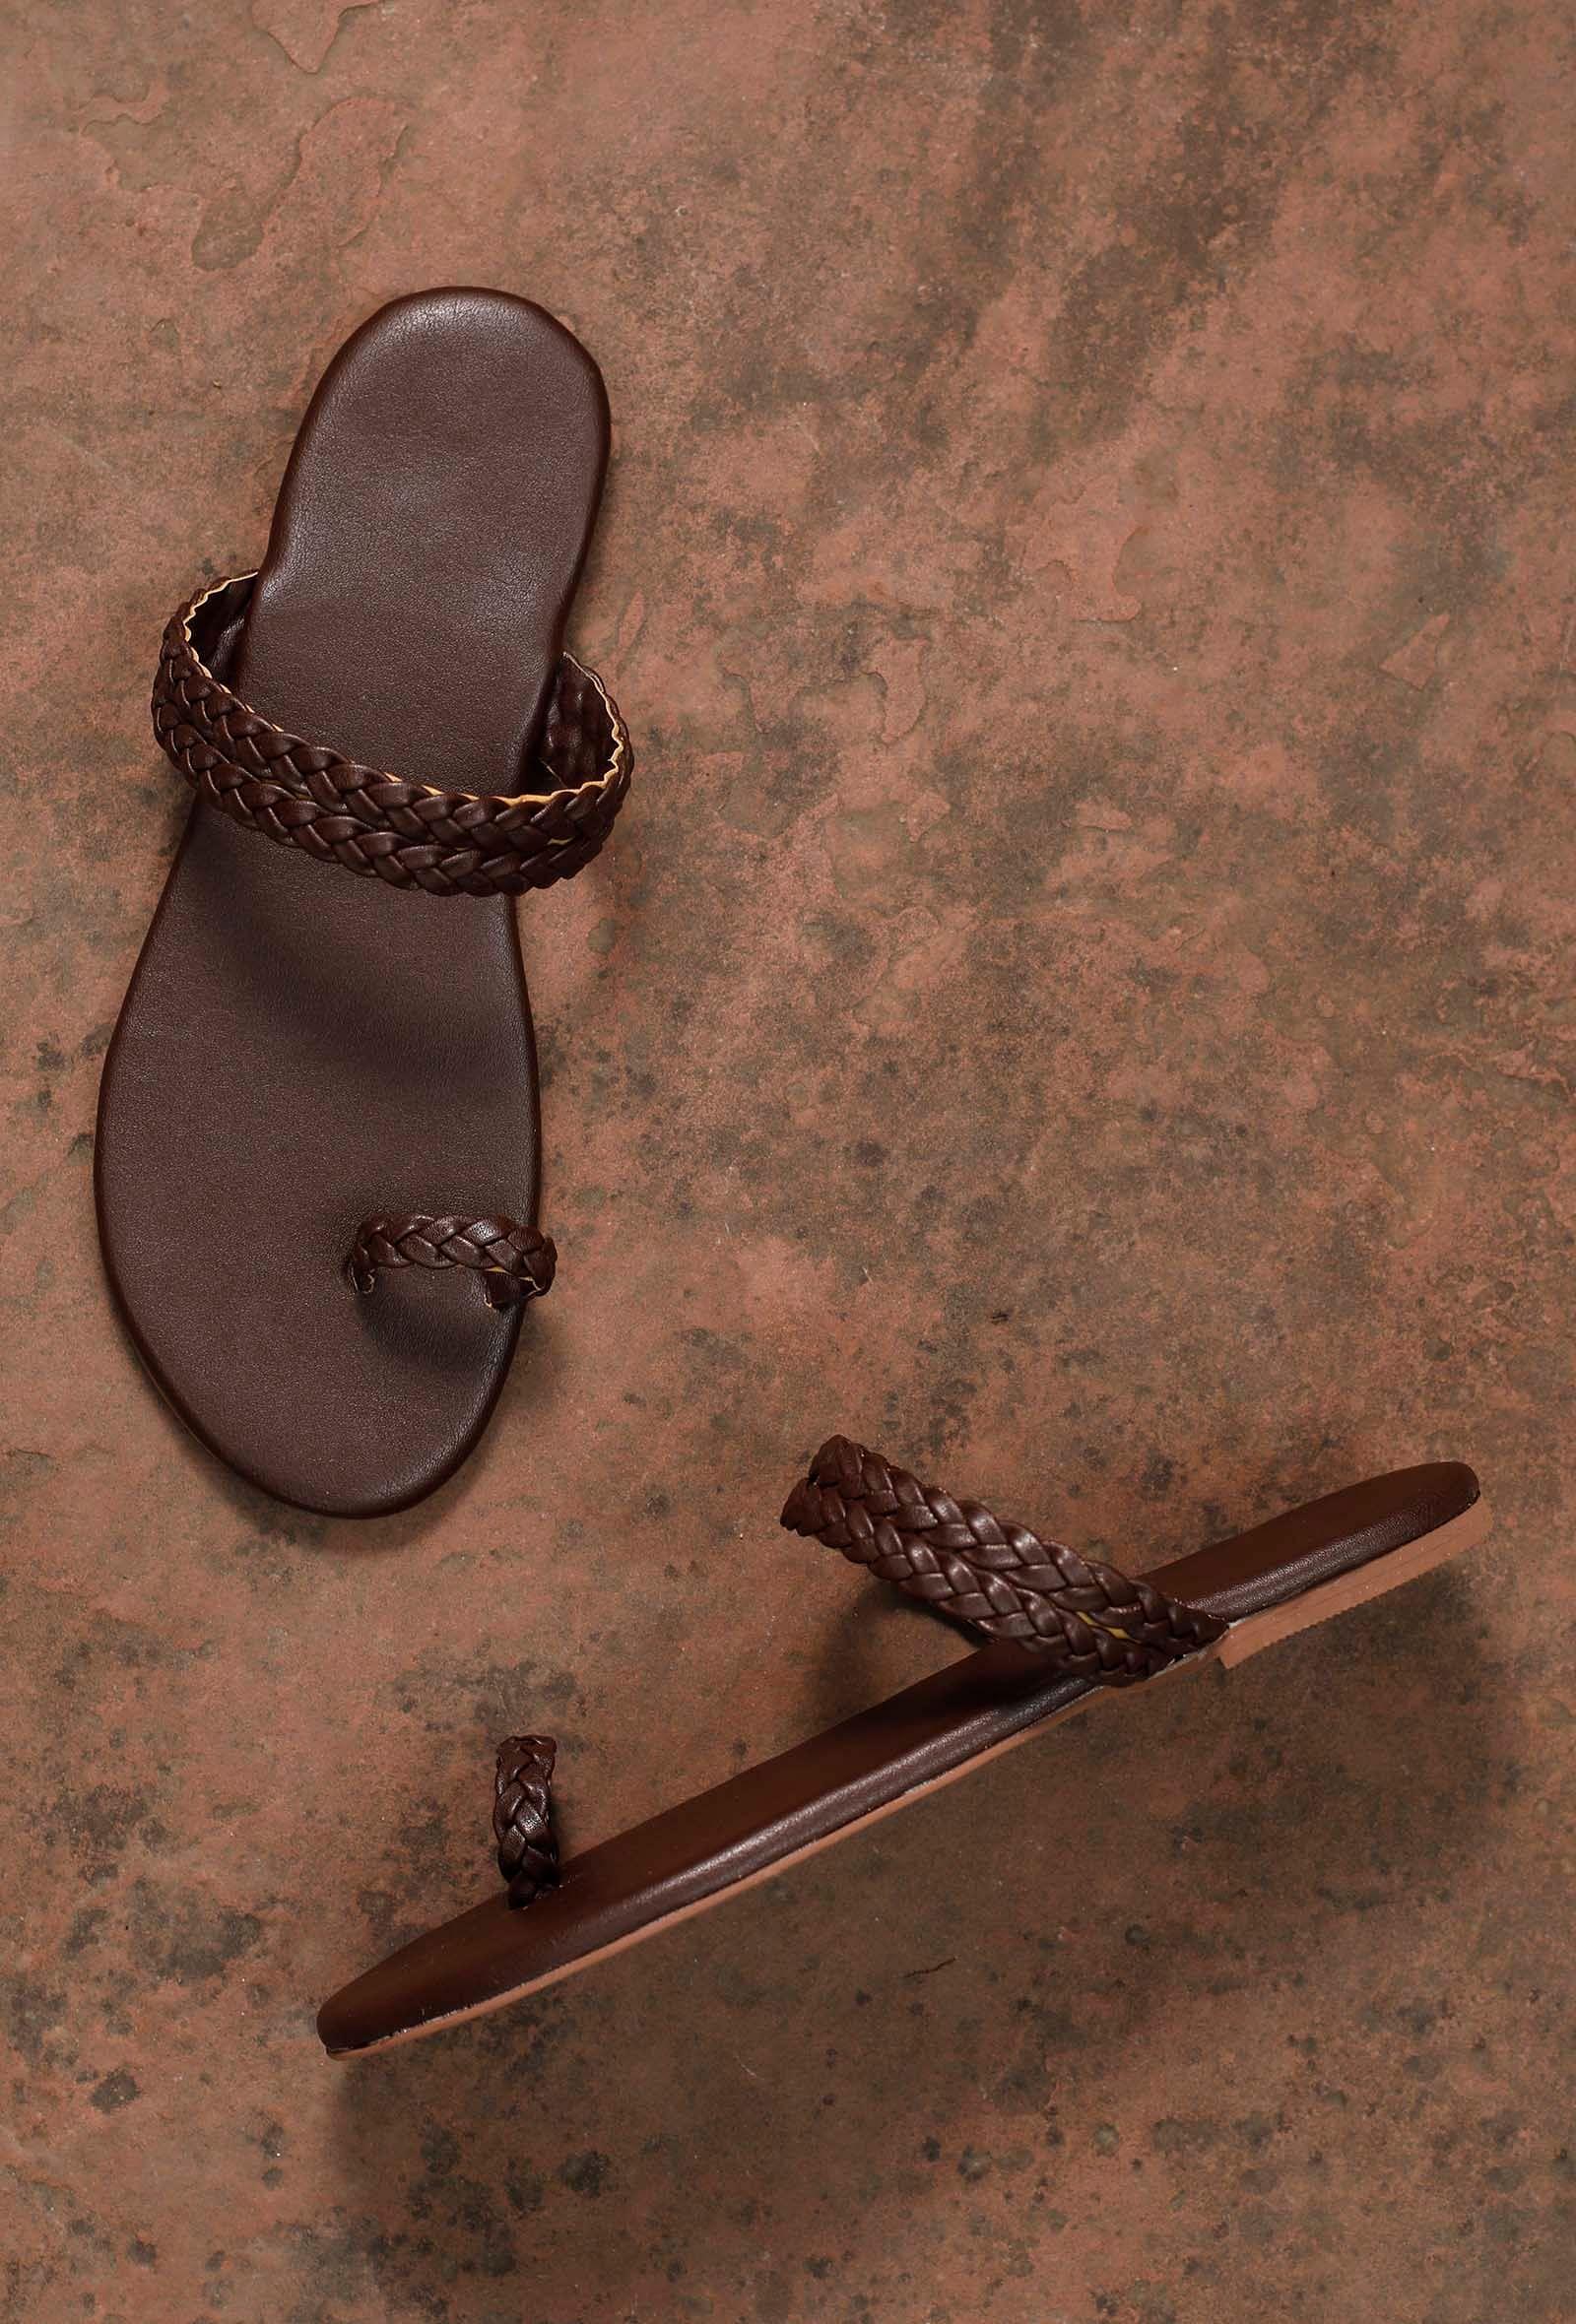 brown-knotted-cruelty-free-leather-sandals